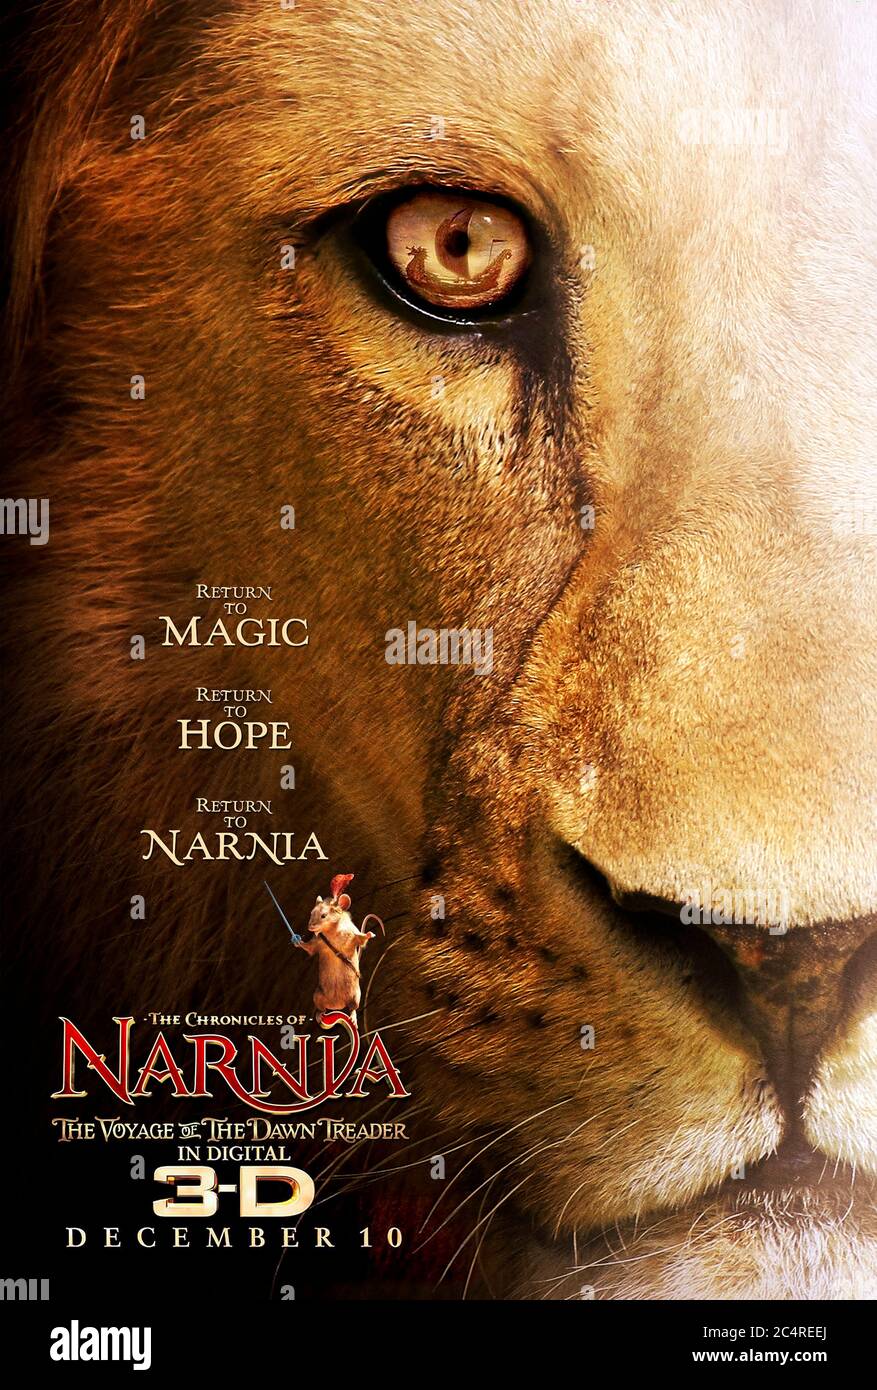 The Chronicles of Narnia: The Voyage of the Dawn Treader (2010) directed by Michael Apted and starring Ben Barnes, Skandar Keynes, Georgie Henley and Will Poulter. Adaptation of the C.S. Lewis' much loved book, Lucy and Edmund return to the magical land of Narnia. Stock Photo